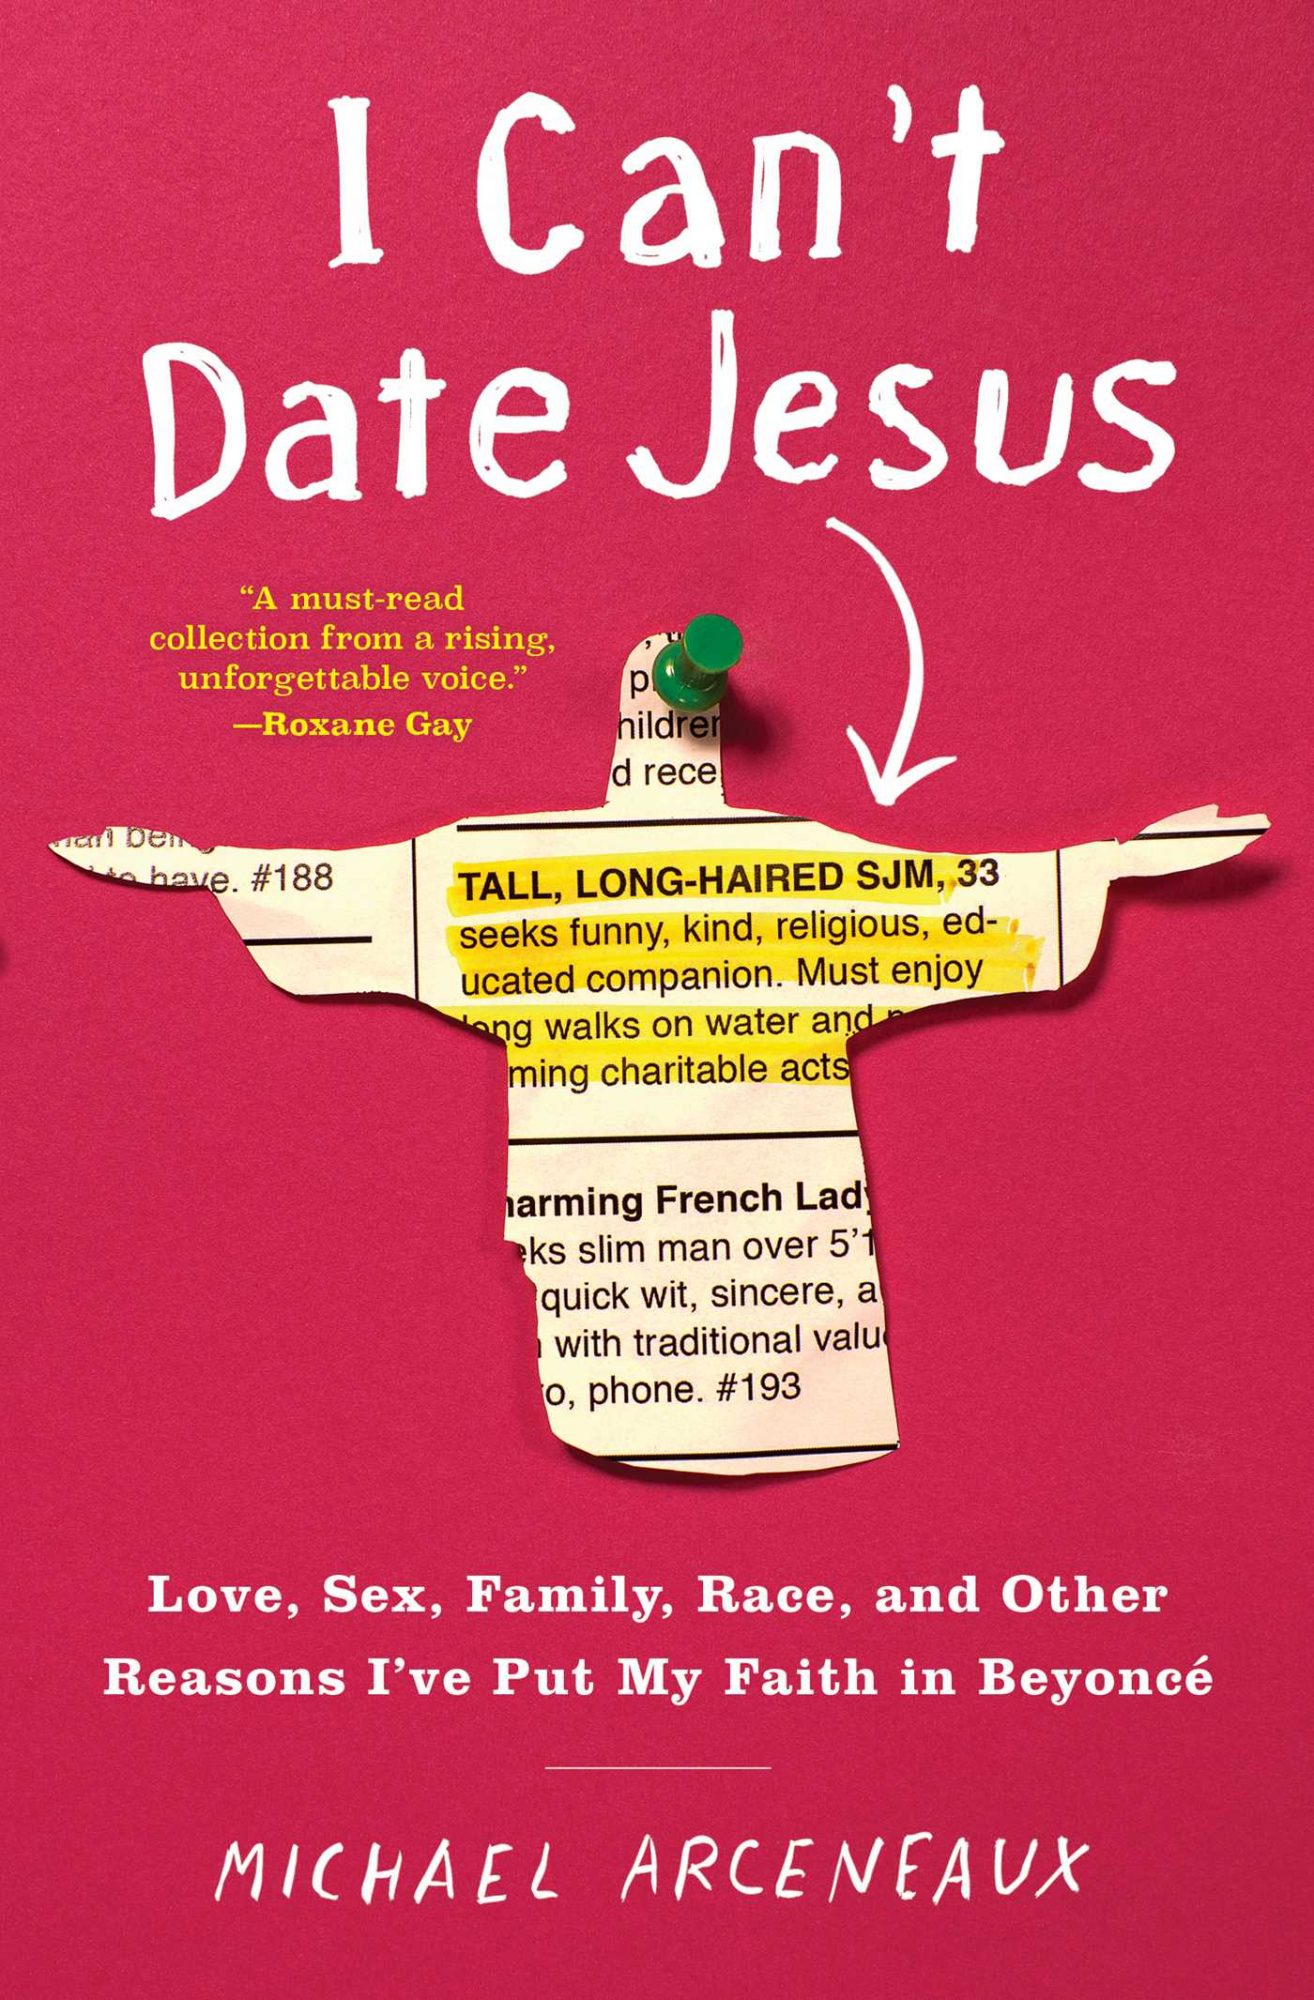 picture-of-I-cant-date-jesus-book-photo.jpg